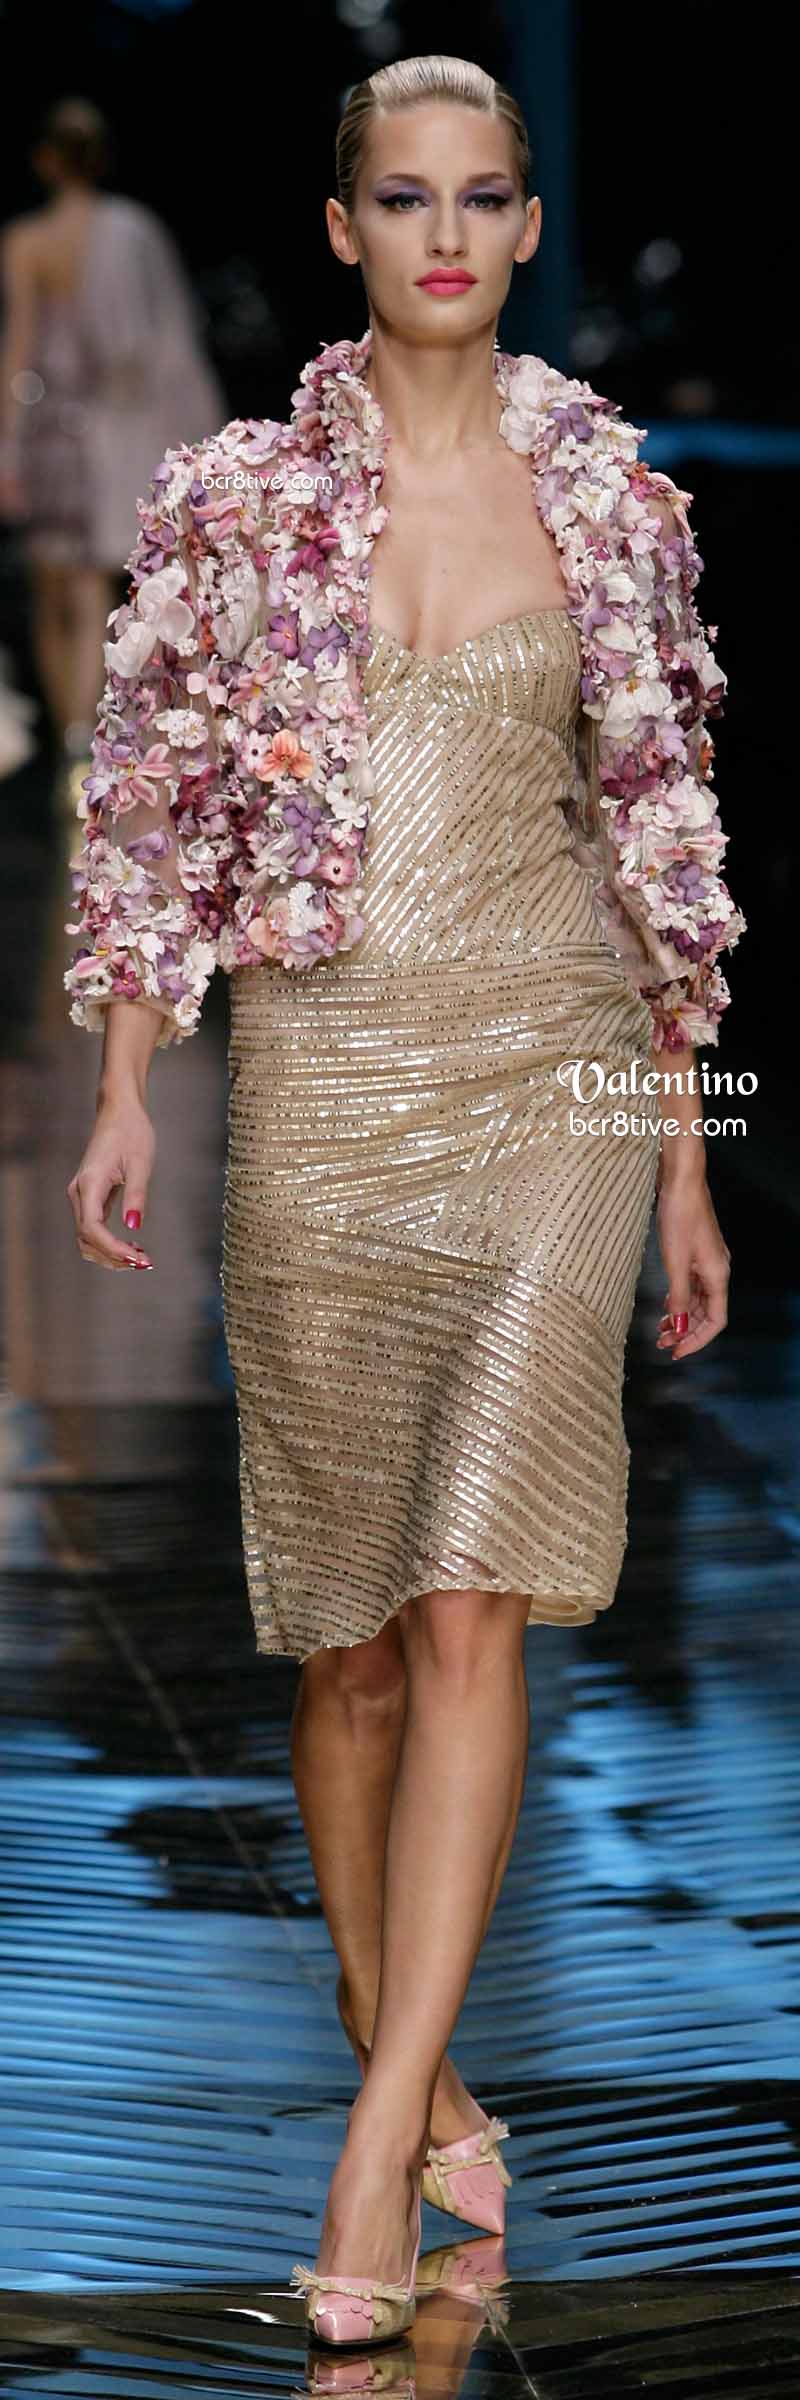 Valentino Floral Applique Jacket and Gold Beaded Dress